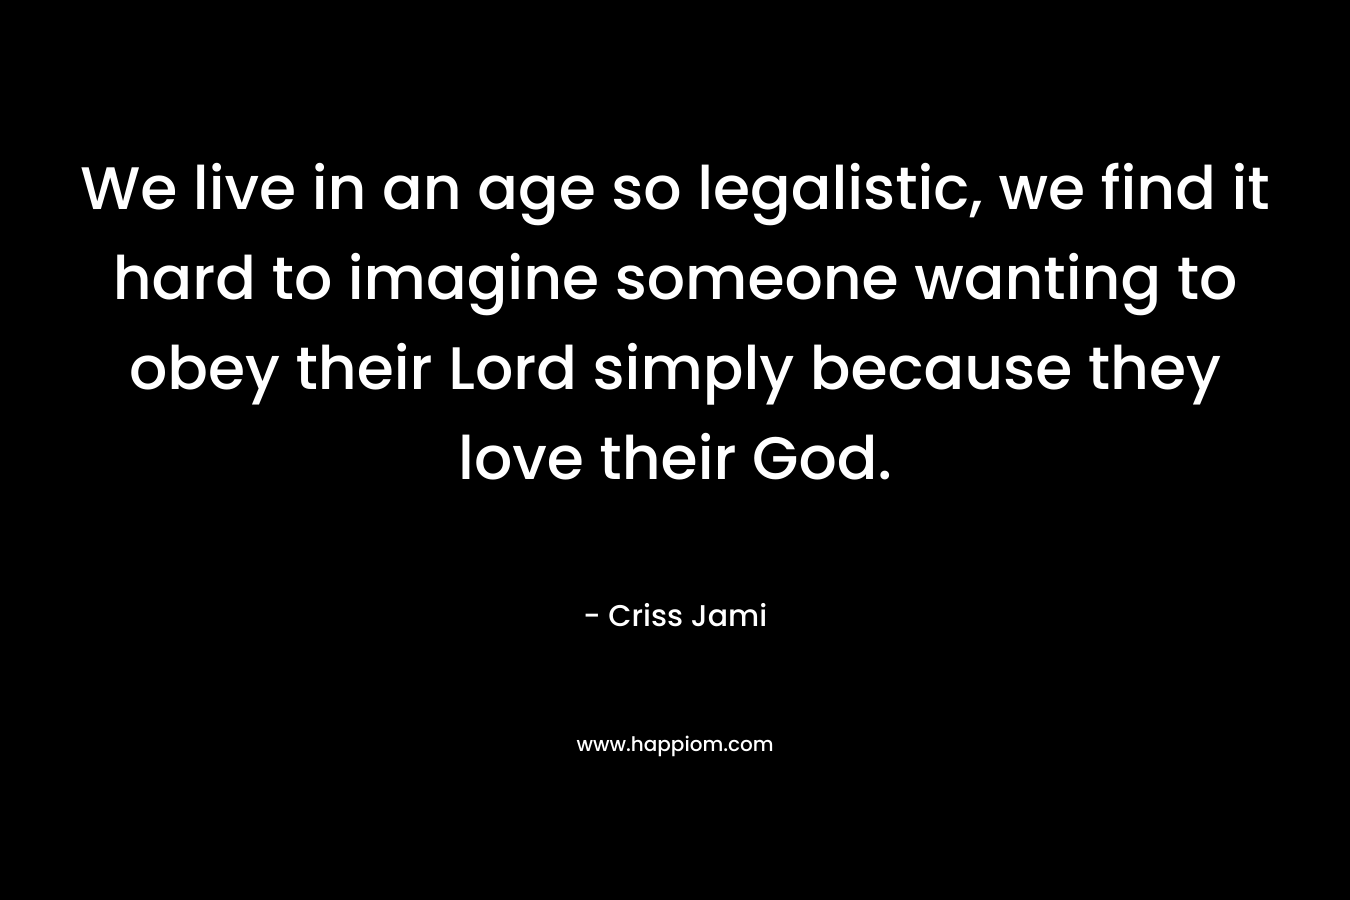 We live in an age so legalistic, we find it hard to imagine someone wanting to obey their Lord simply because they love their God.